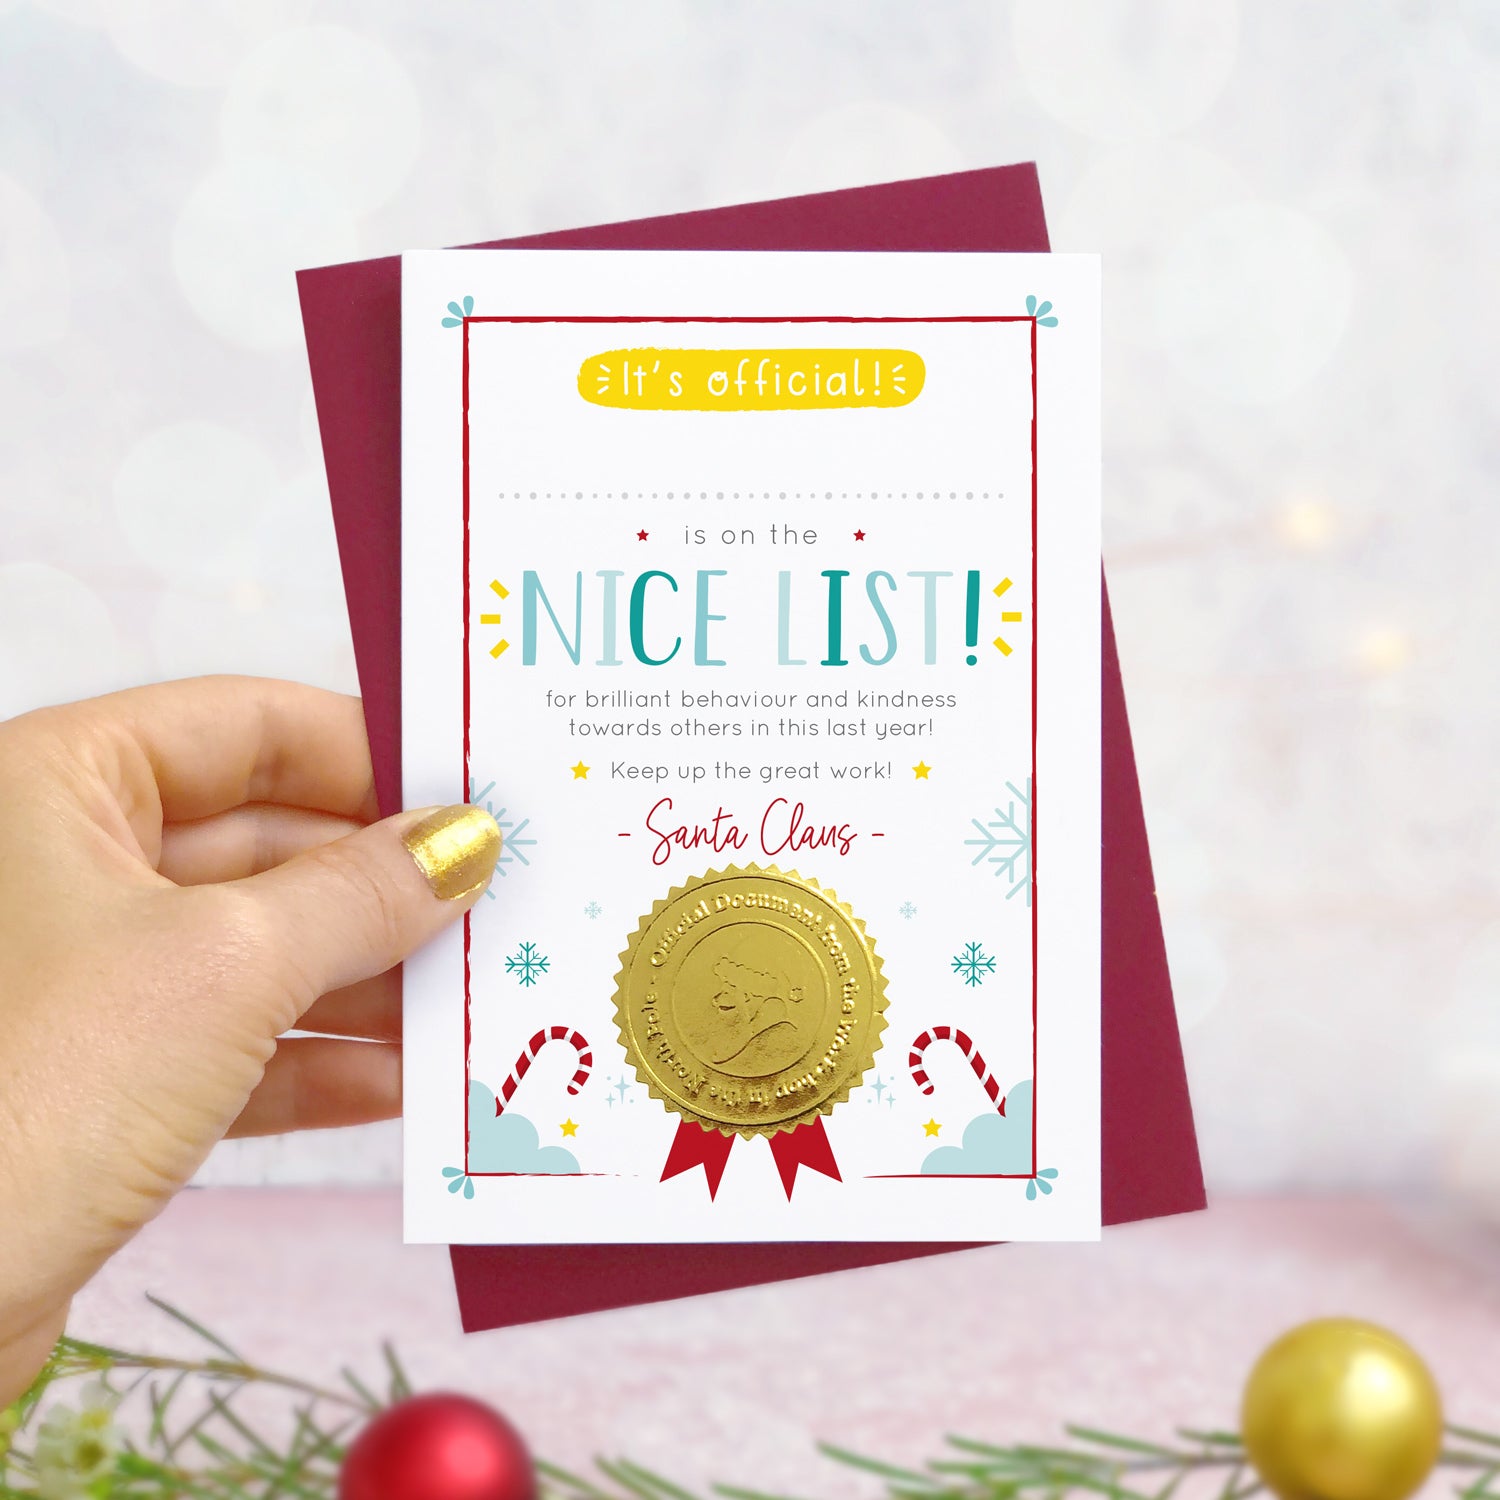 A nice list certificate card photographed in hand in front of a grey and dusty pink background with foliage and baubles in the foreground. The card has a blank space for you to write a childs name. It also features a shiny gold seal with the face of a santa character.